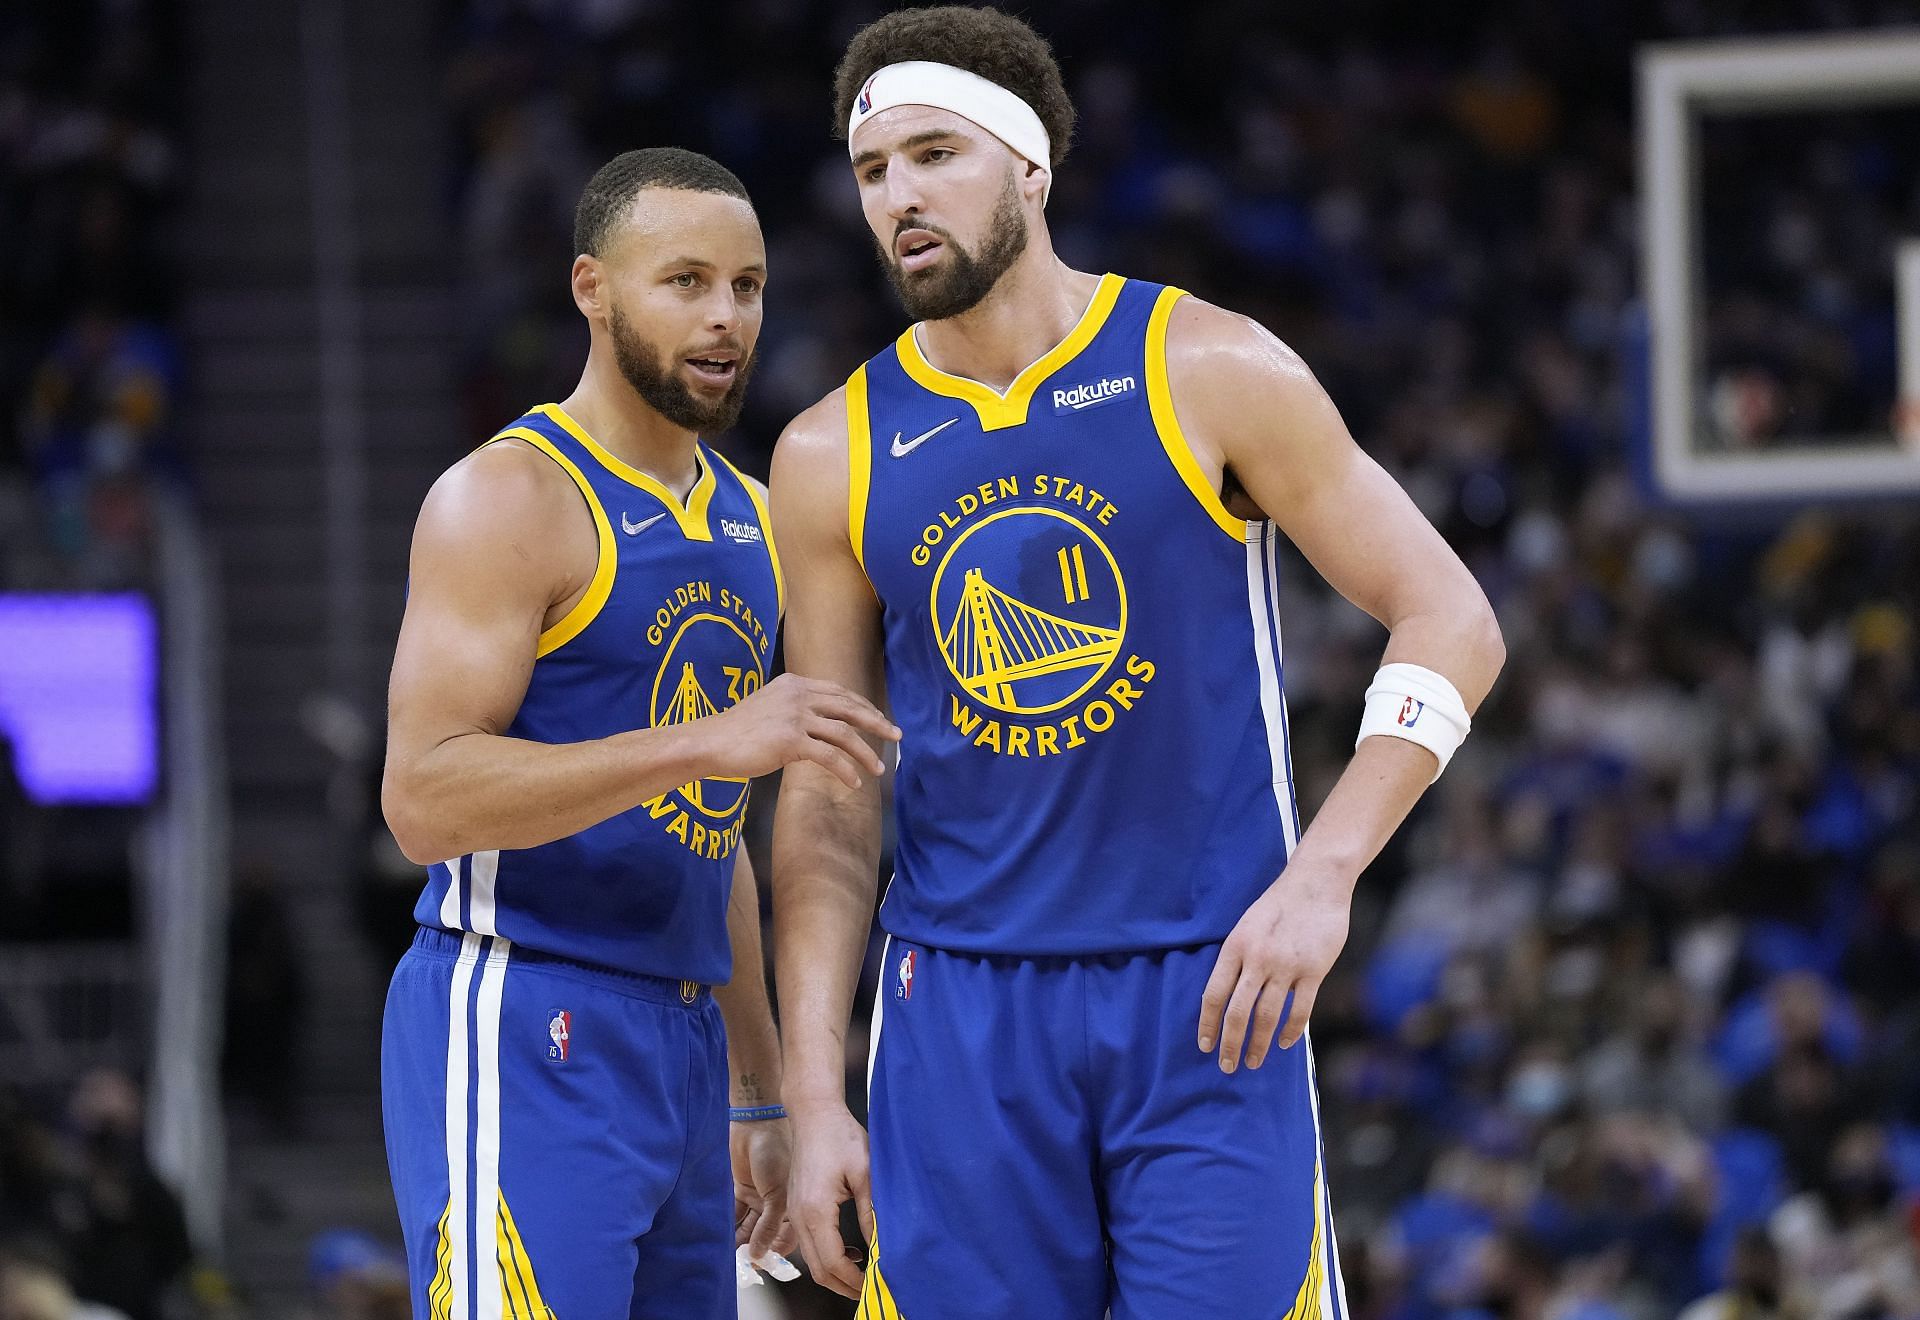 Steph Curry and Klay Thompson discuss a play.